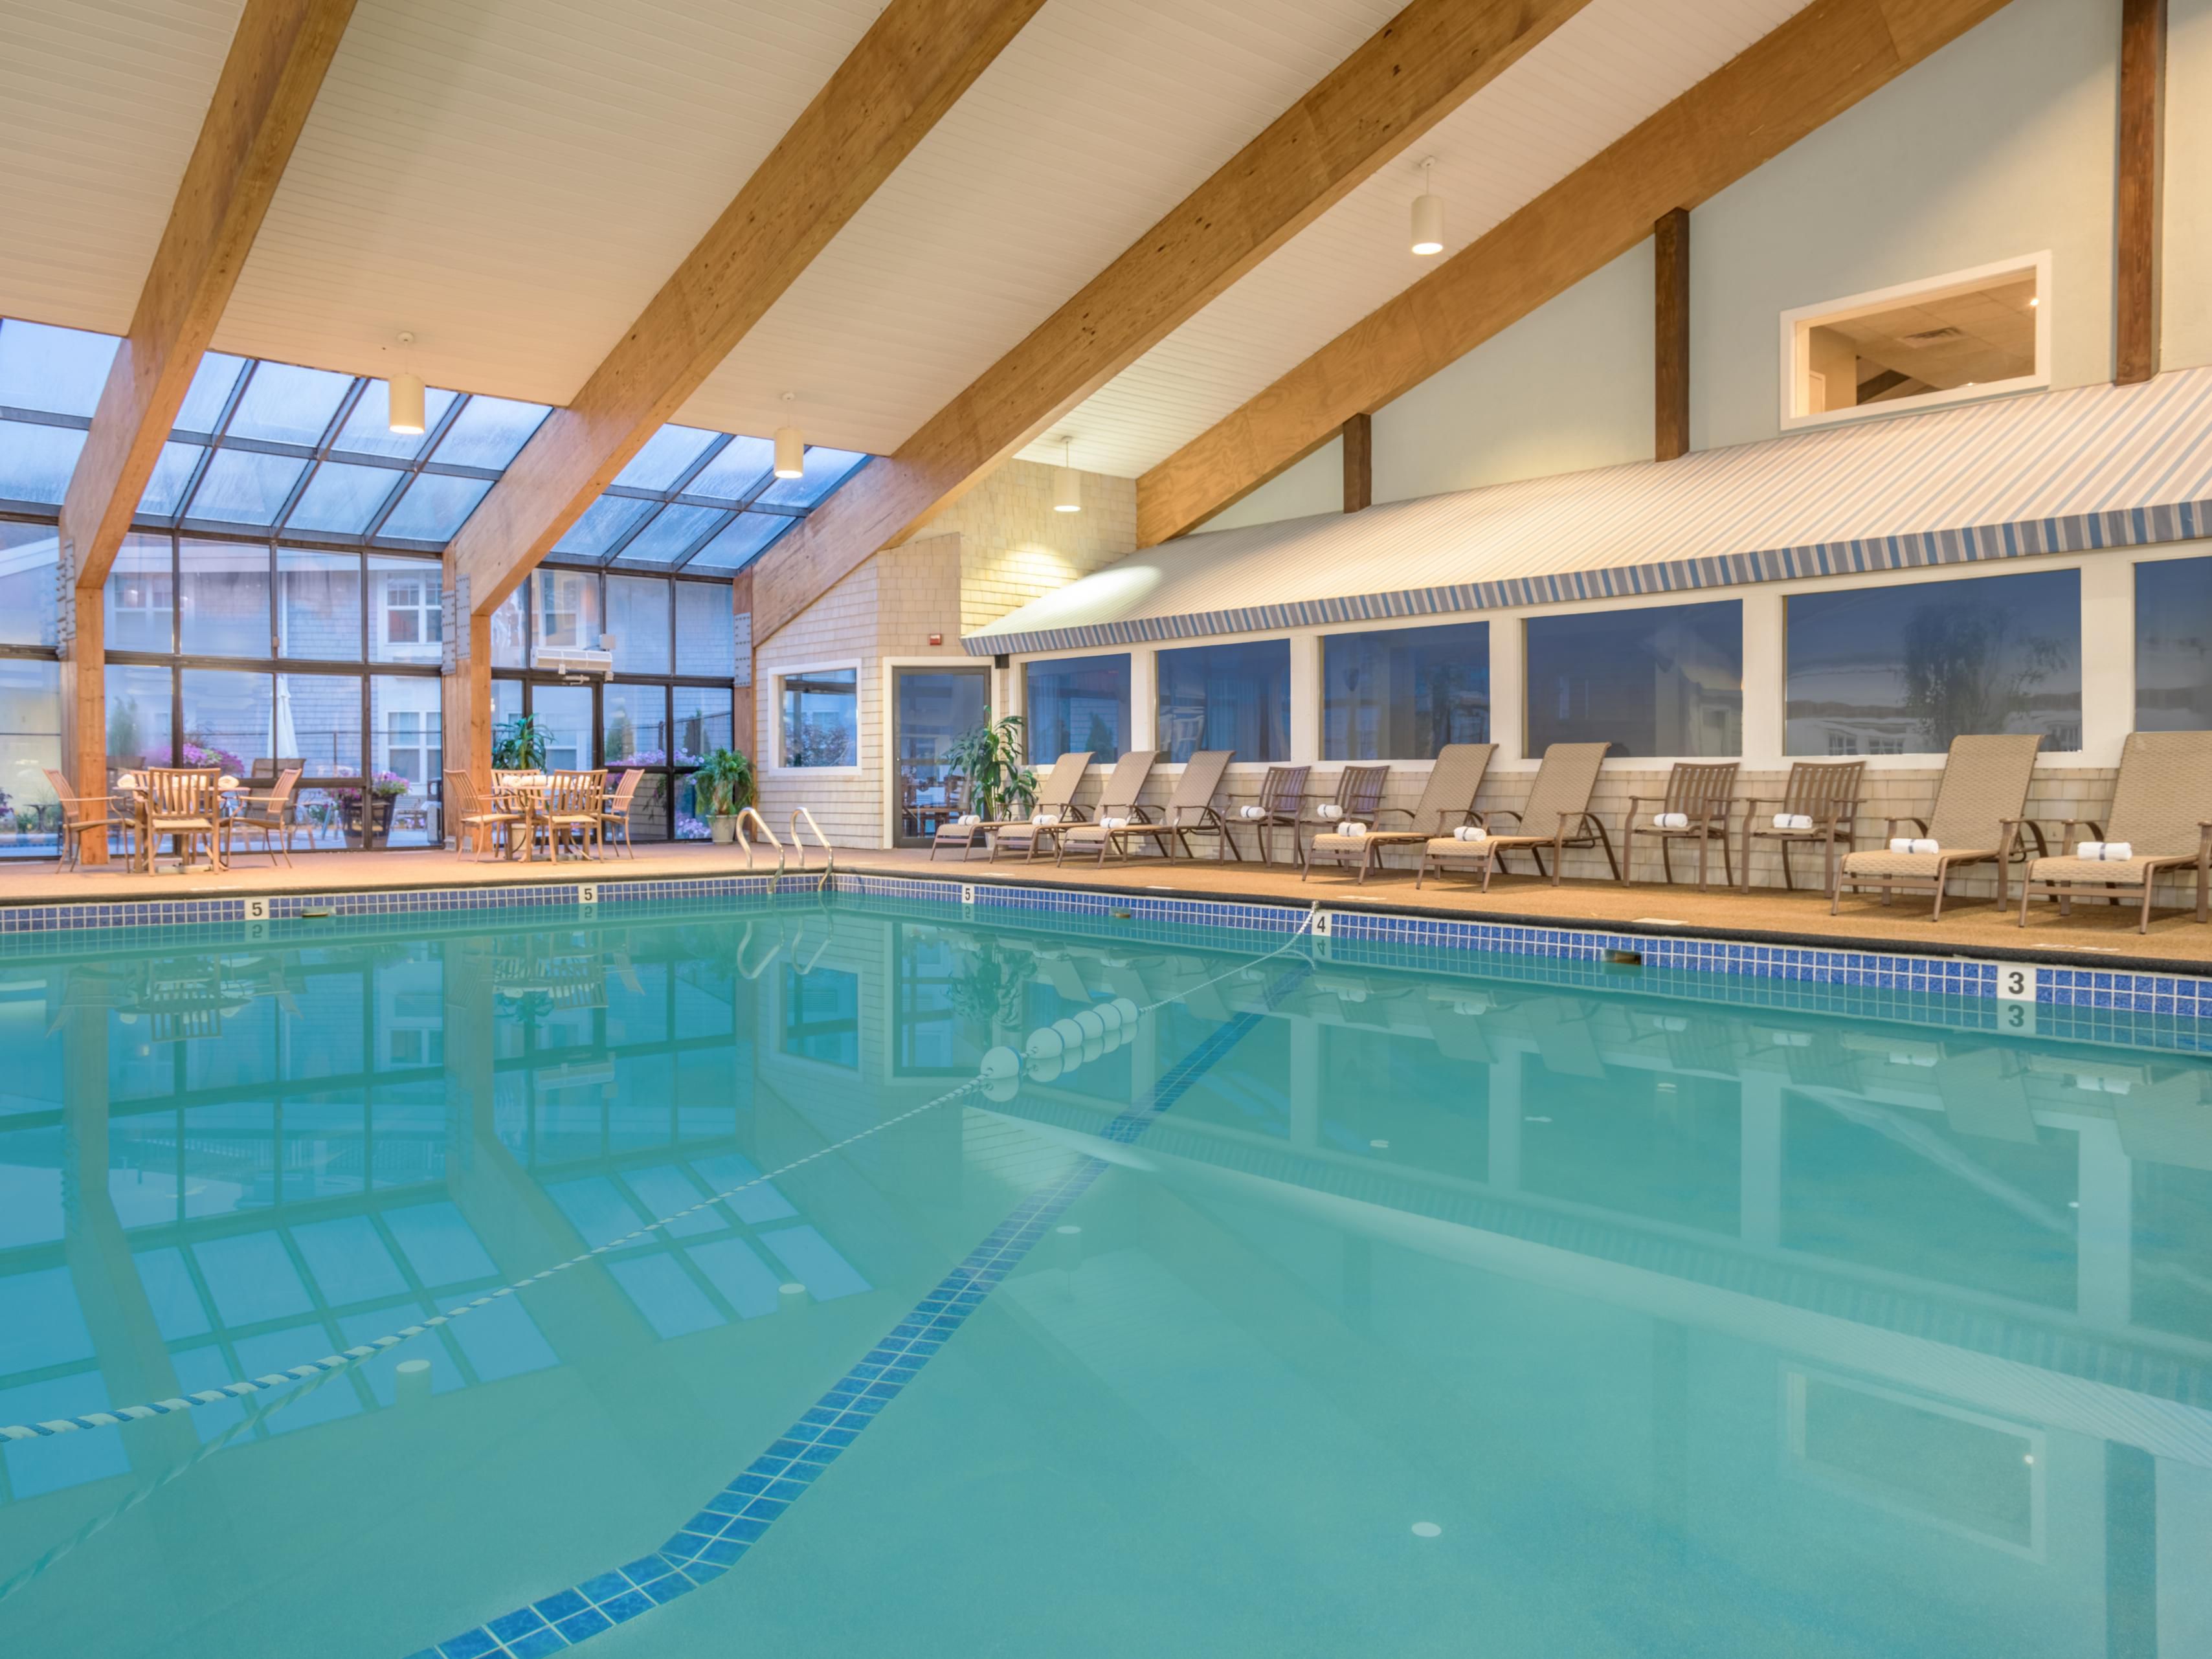 Enjoy our beautiful indoor heated pool. Pool open daily 9 am - 9 pm during February School Vacation (February 17 - 24).   